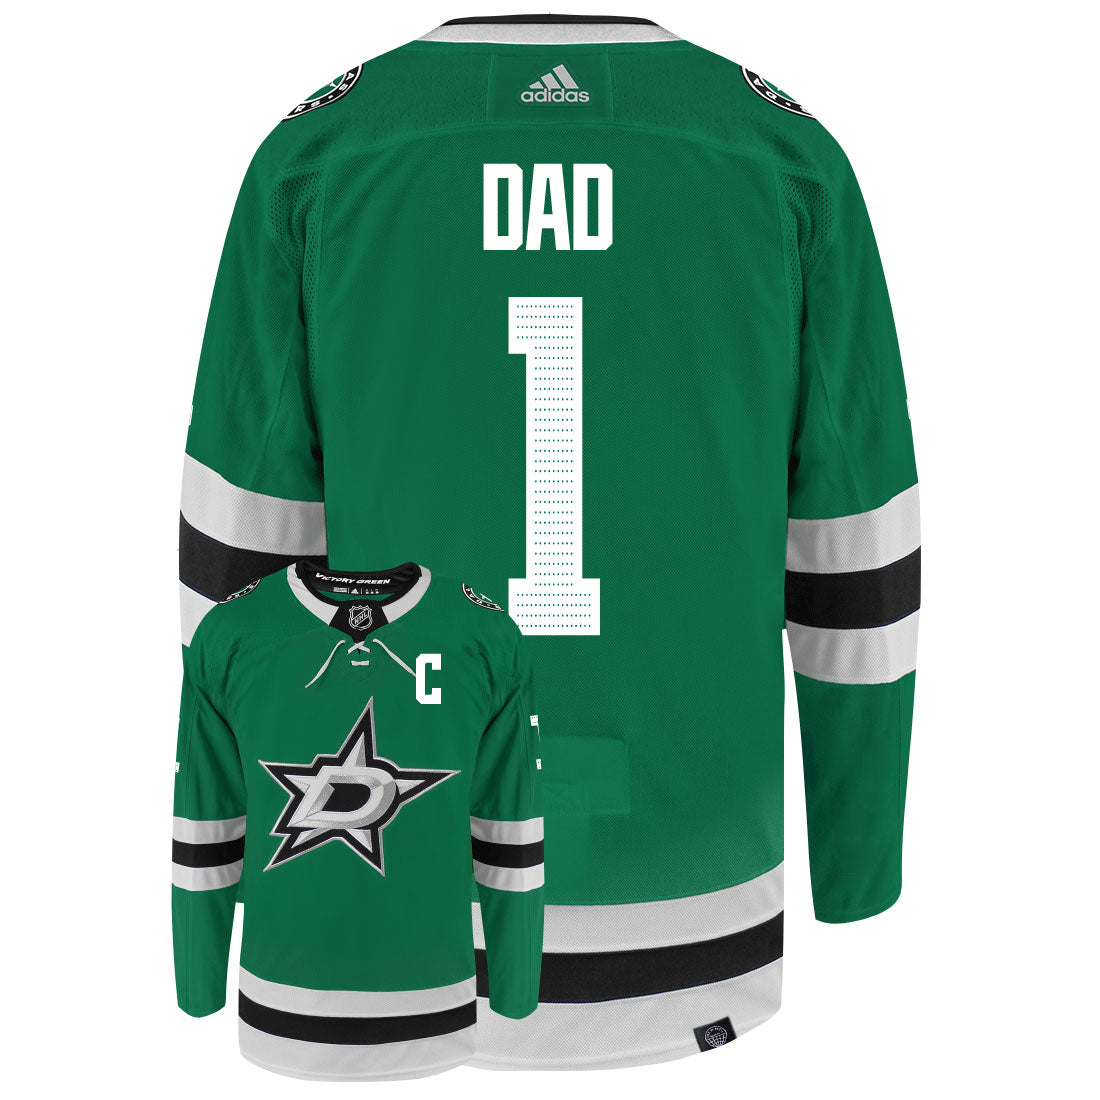 Dallas Stars Dad Number One Adidas Primegreen Authentic NHL Hockey Jersey - Back/Front View